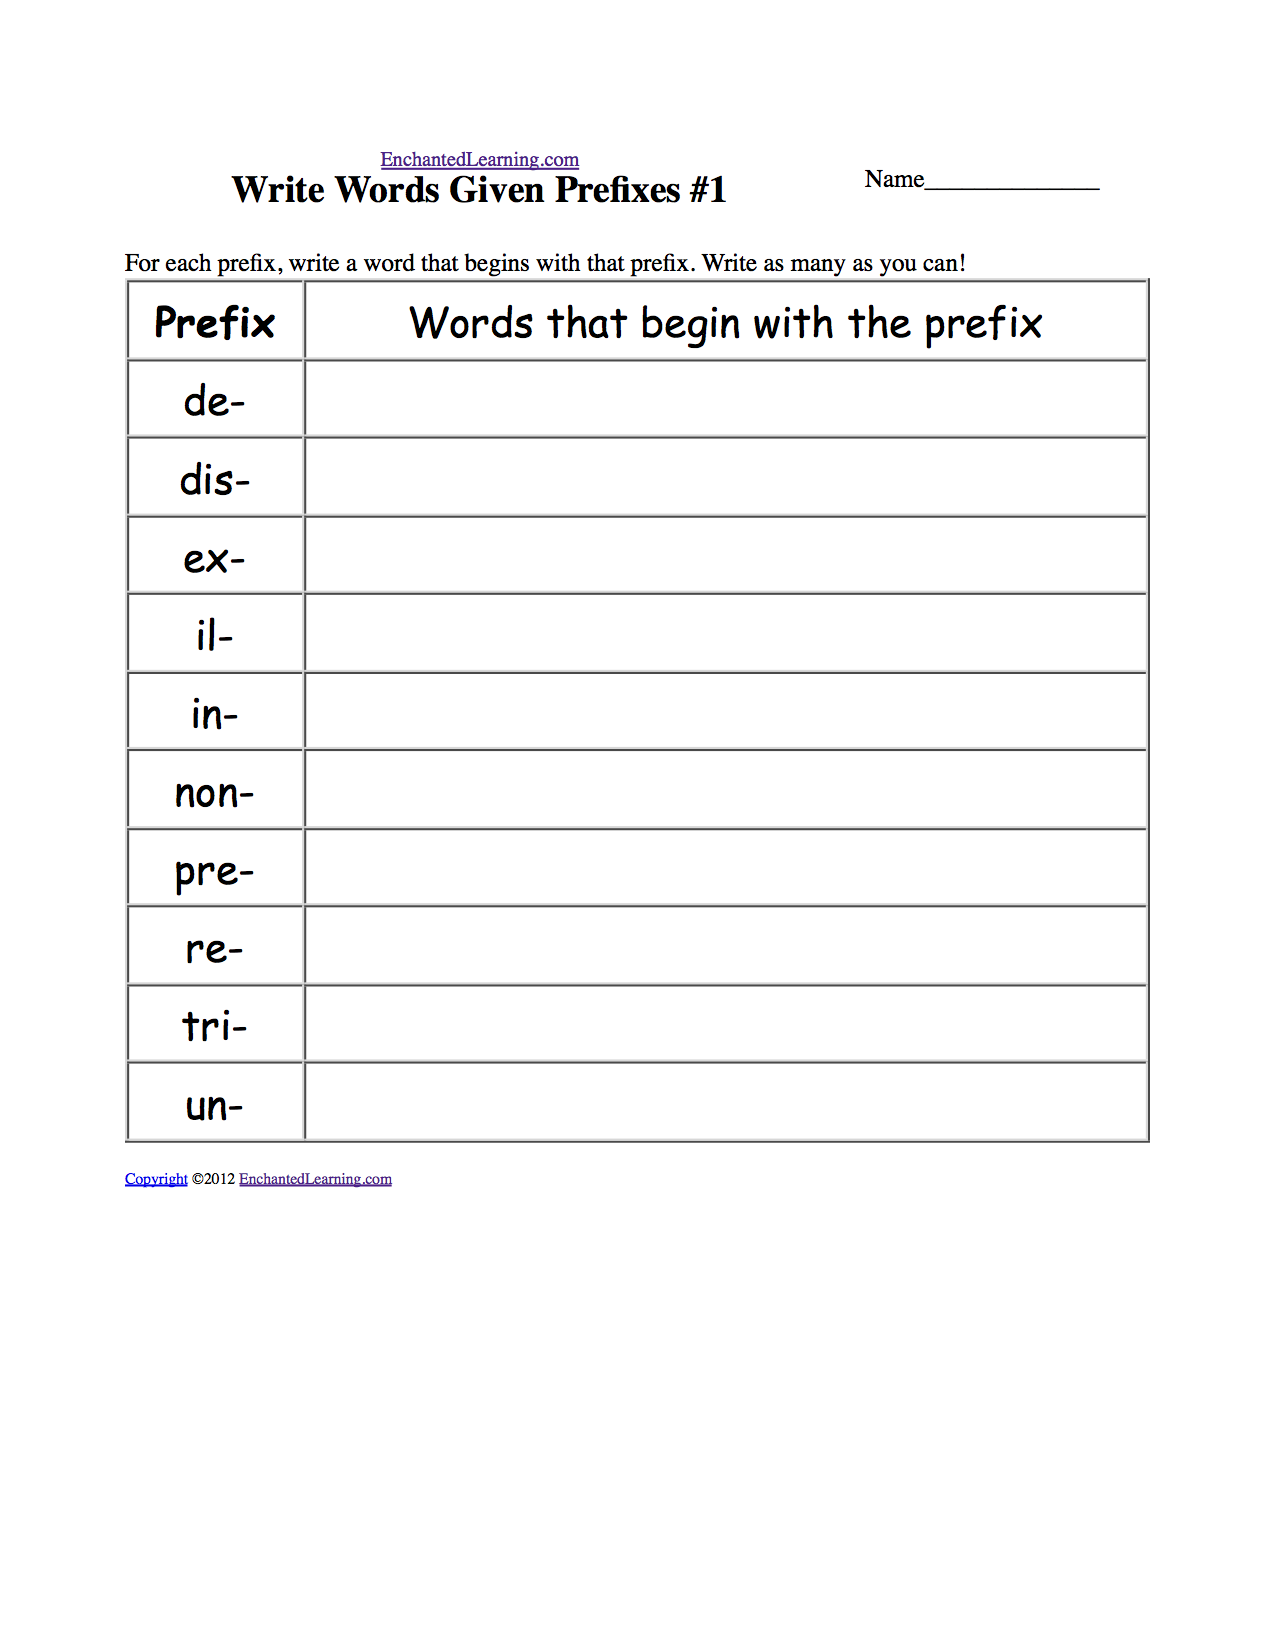 Prefixes and Suffixes - Enchanted Learning Throughout Prefixes And Suffixes Worksheet